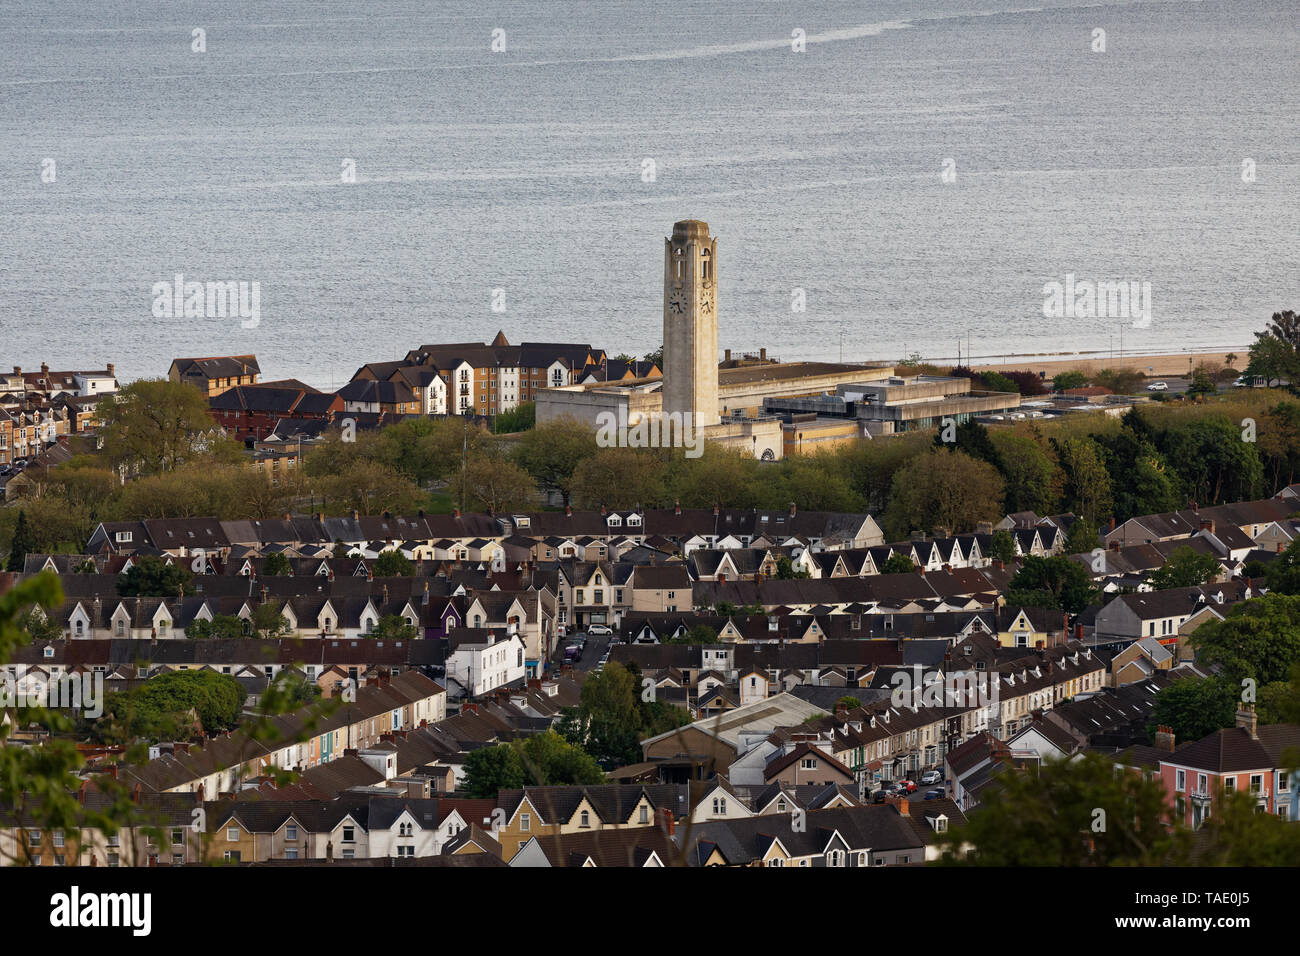 Pictured: The Guildhall in Swansea. Wednesday 22 May 2019 Re: General view of Swansea, Wales, UK Stock Photo